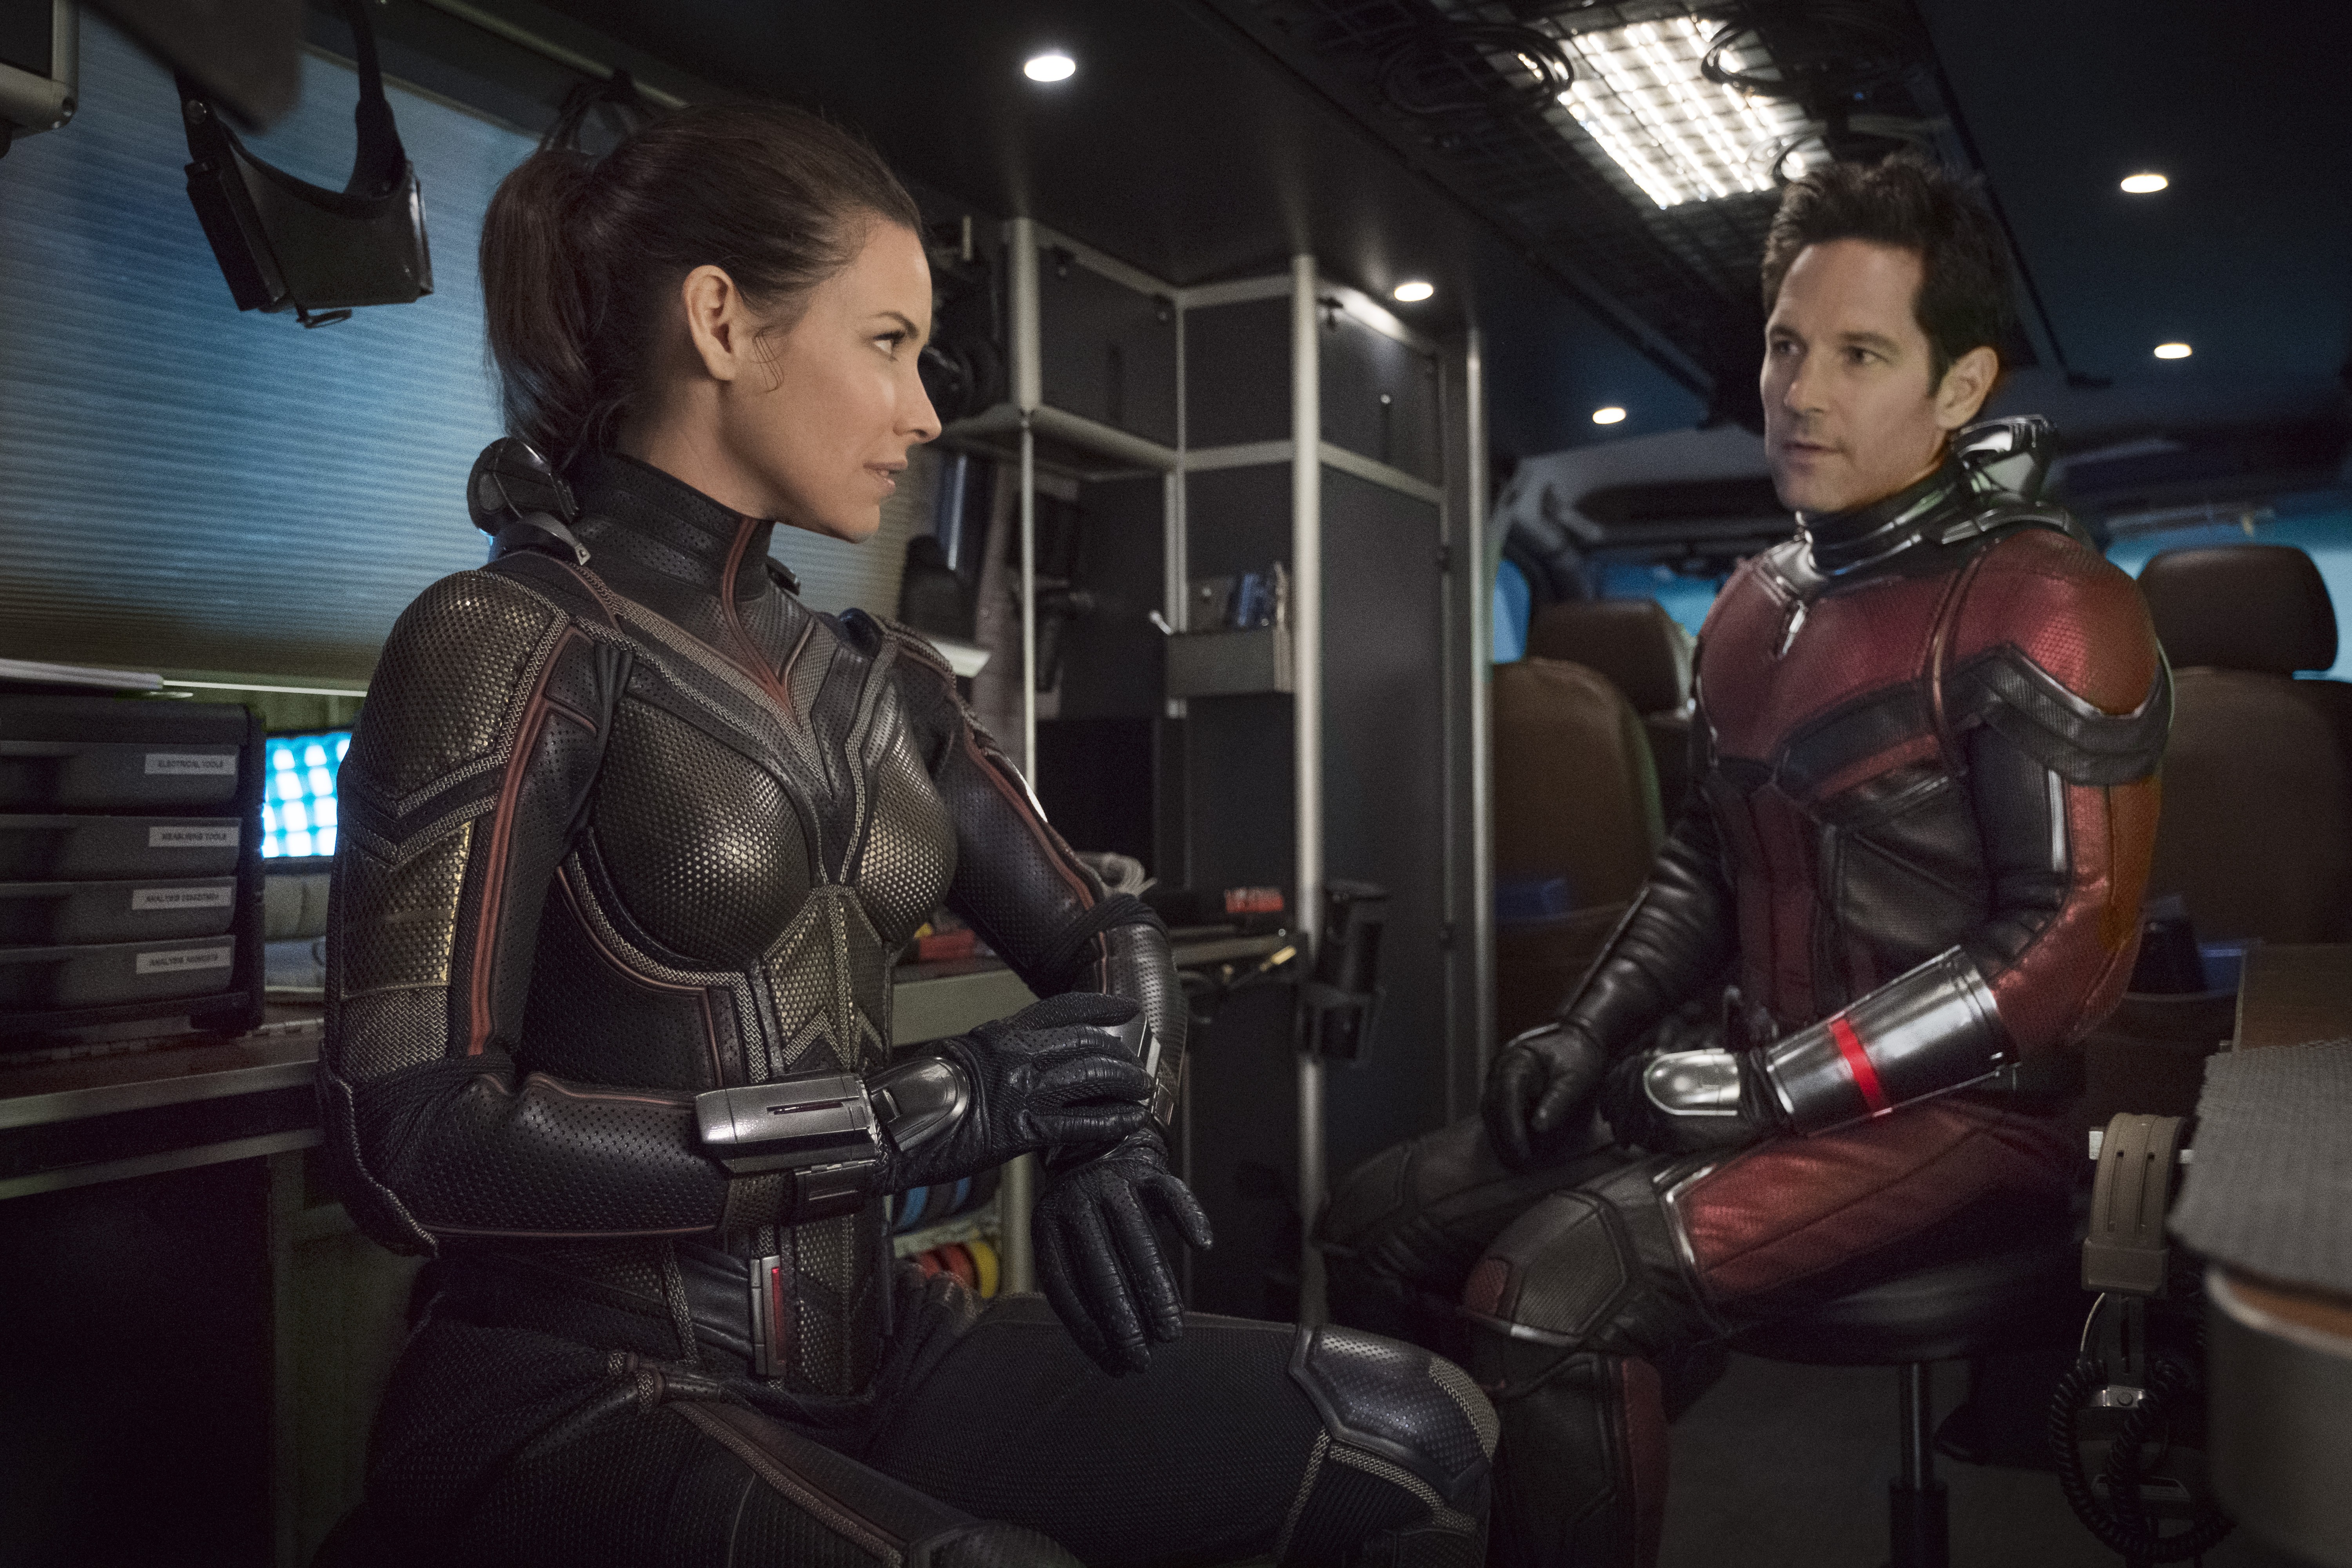 vex movies antman and the wasp